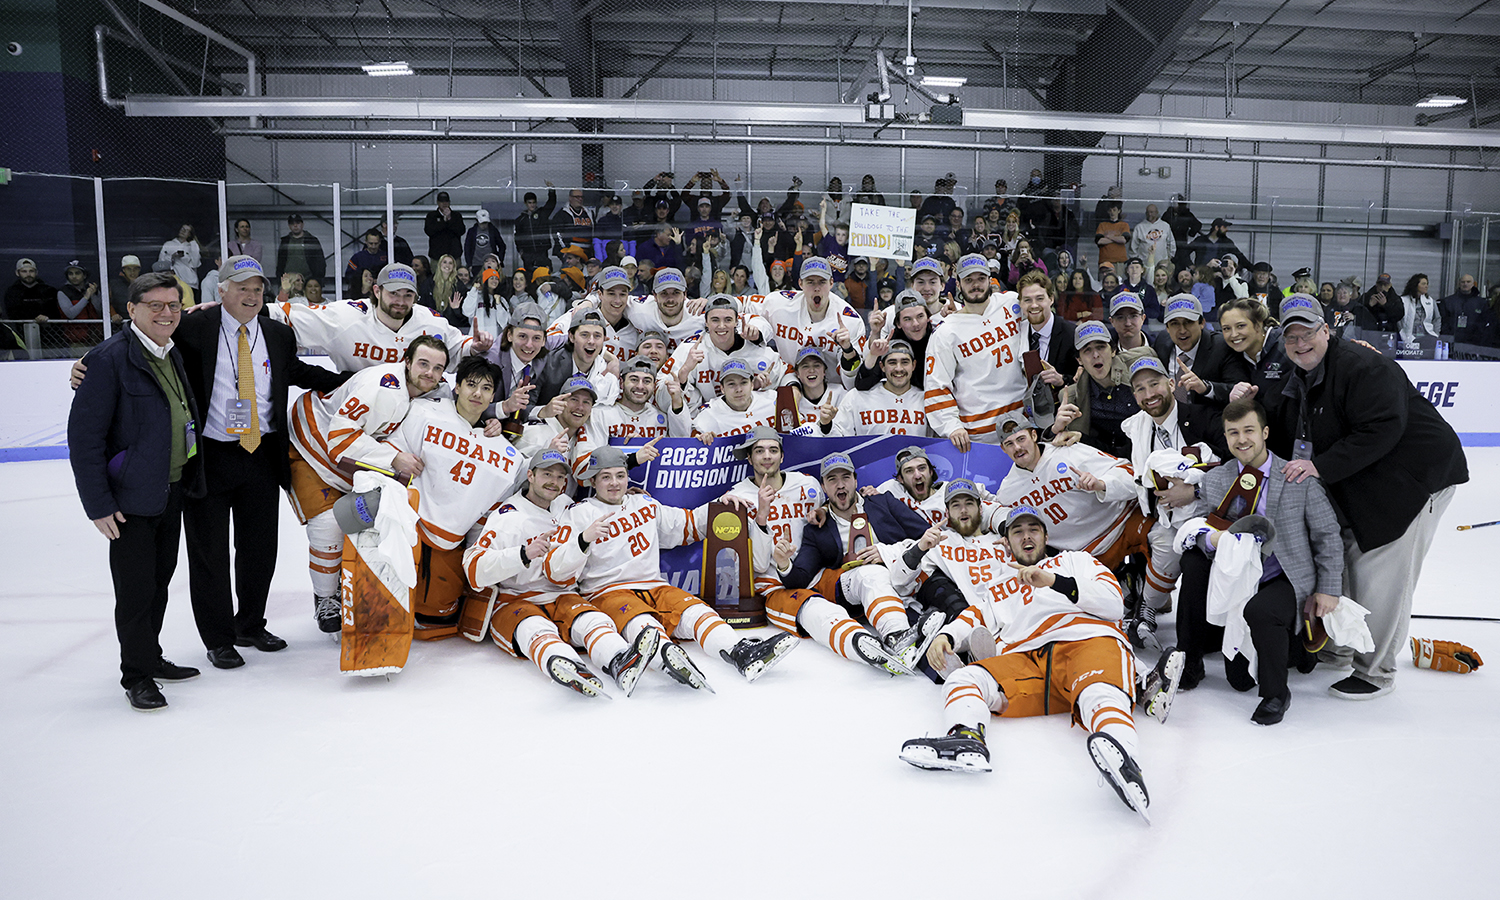 In This Week in Photos, we look back at some of our favorite athletics photos from the semester. Here, the Hobart Hockey team celebrates after winning the 2023 NCAA Division III Men’s Ice Hockey Championship. The Statesmen went 29-2-0 on their way to winning their first national championship in program history.